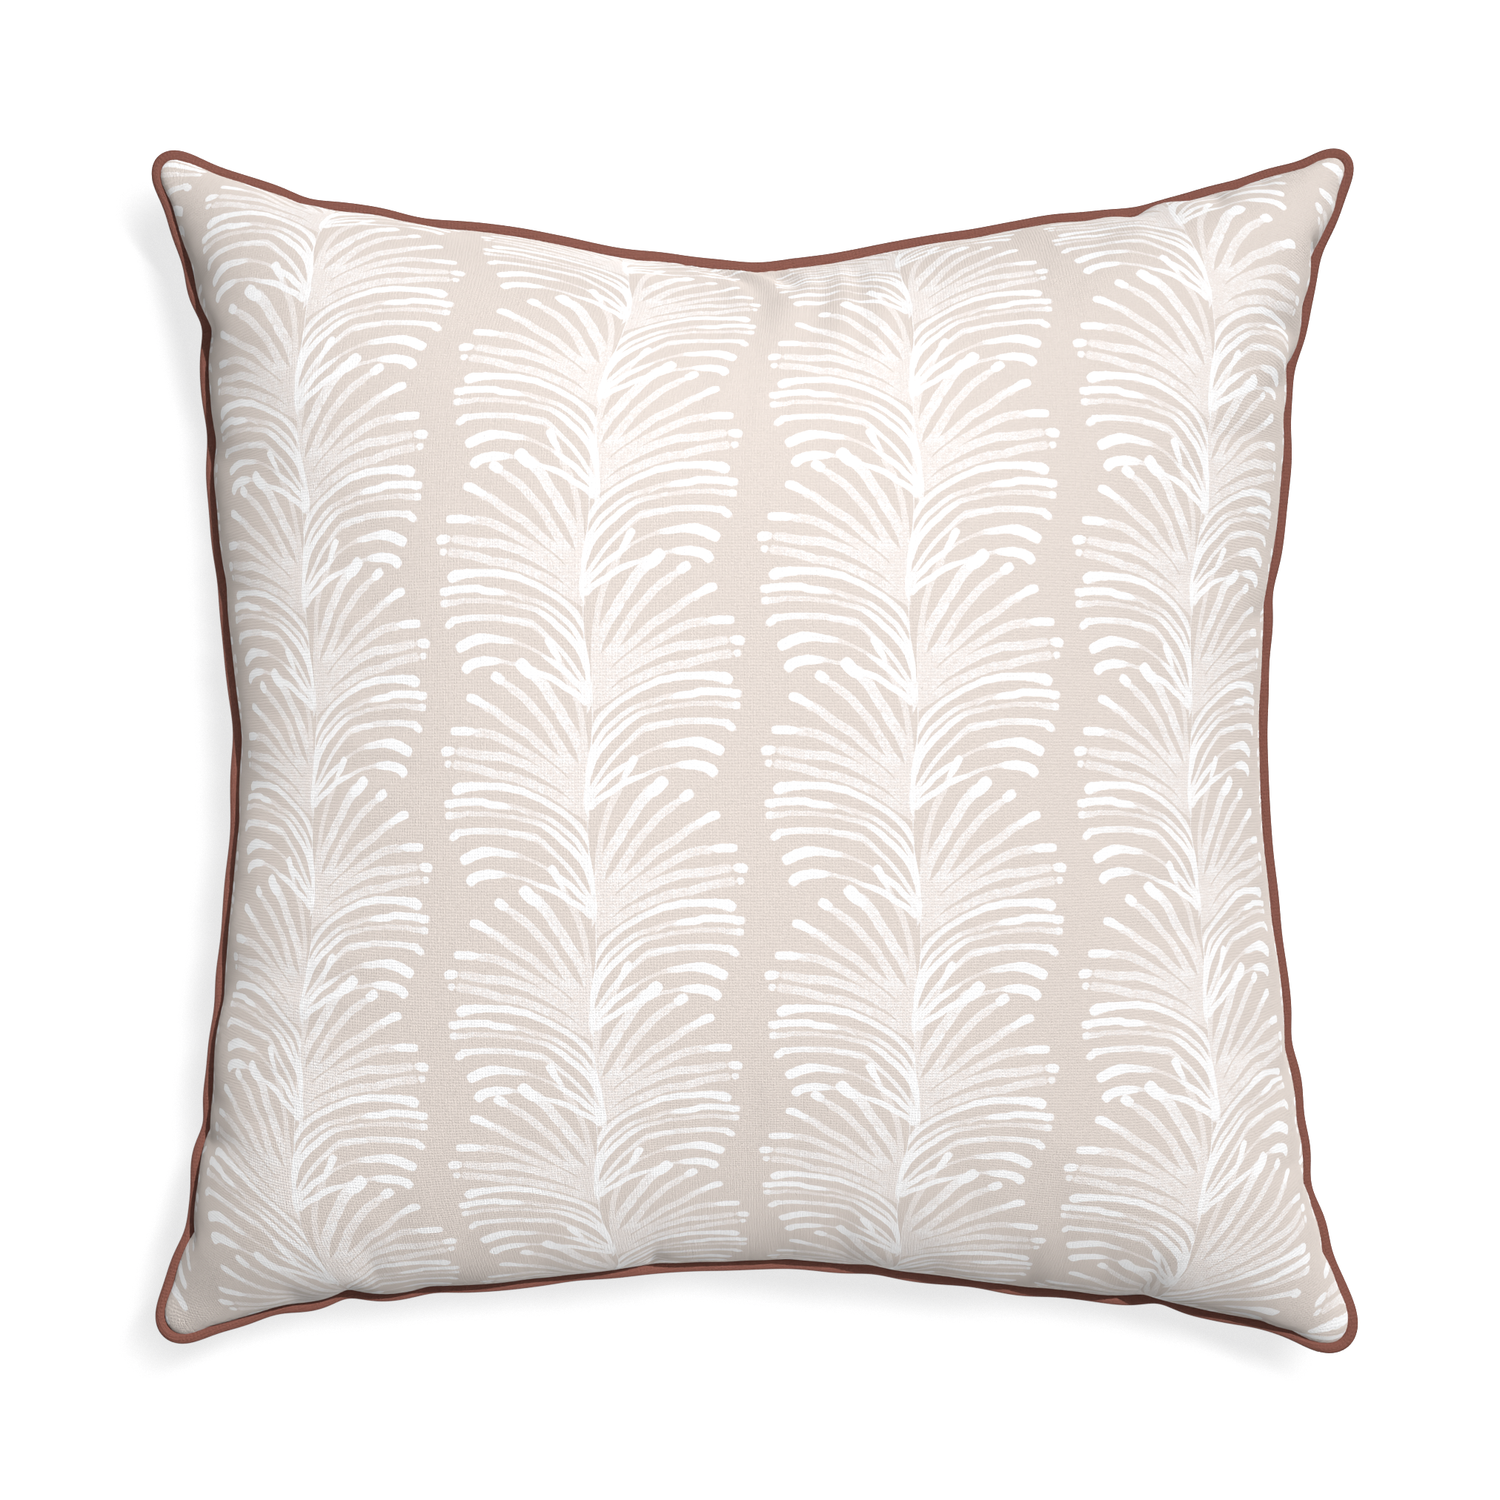 Euro-sham emma sand custom pillow with w piping on white background